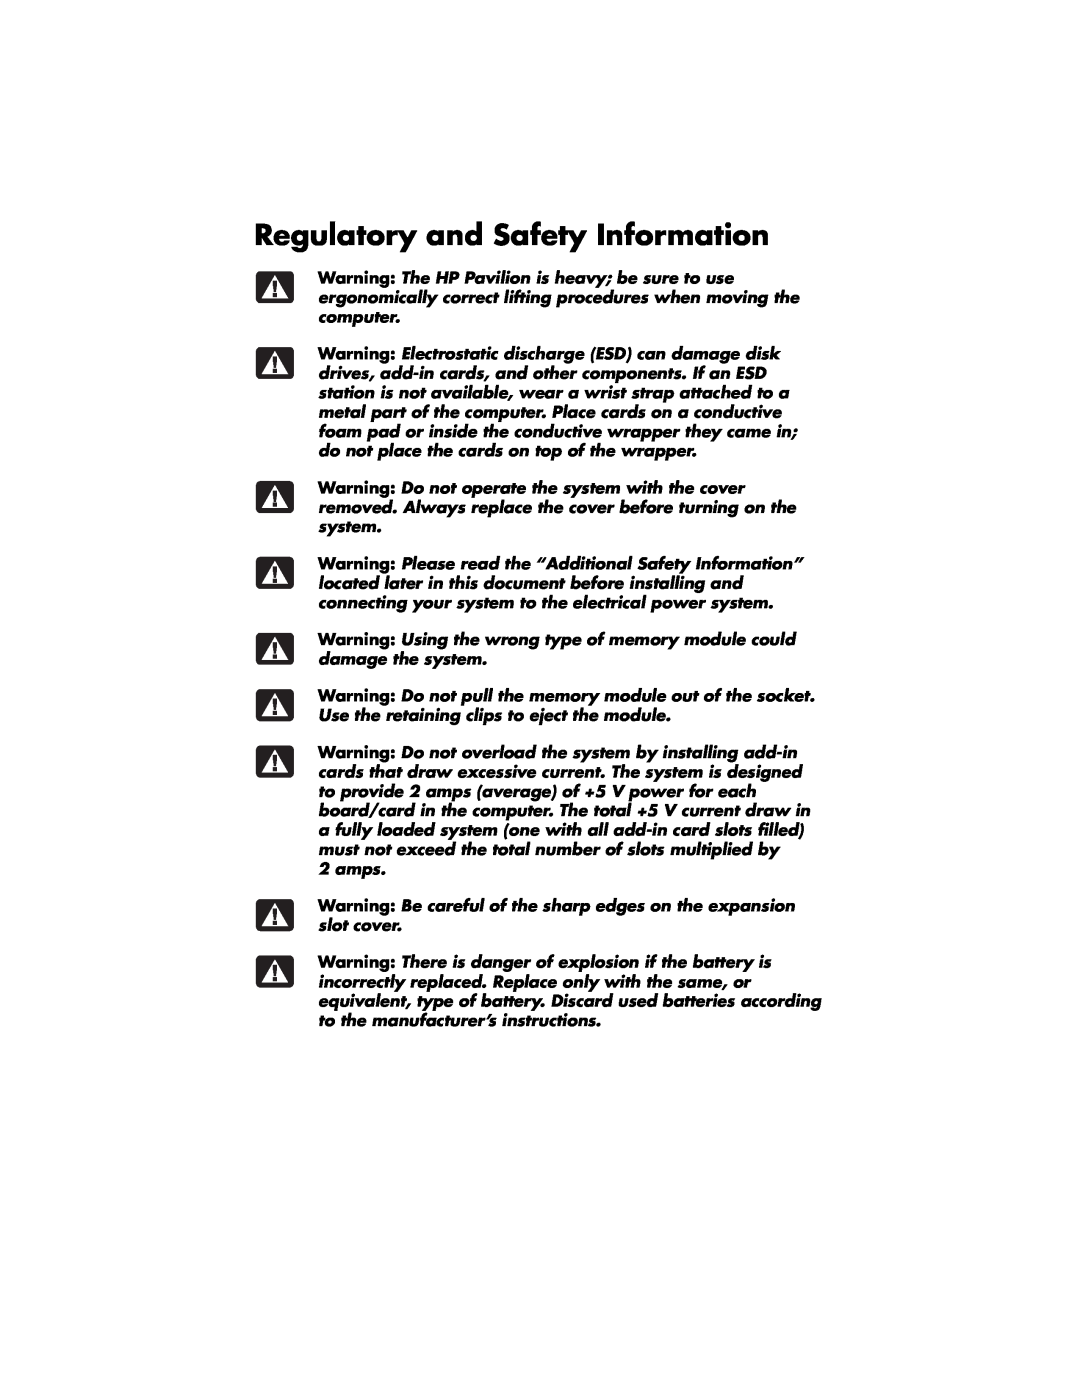 HP 754v (US/CAN), 734n (US/CAN), 724c (US/CAN), 524c (US/CAN), 524w (US), 564w (US/CAN) manual Regulatory and Safety Information 